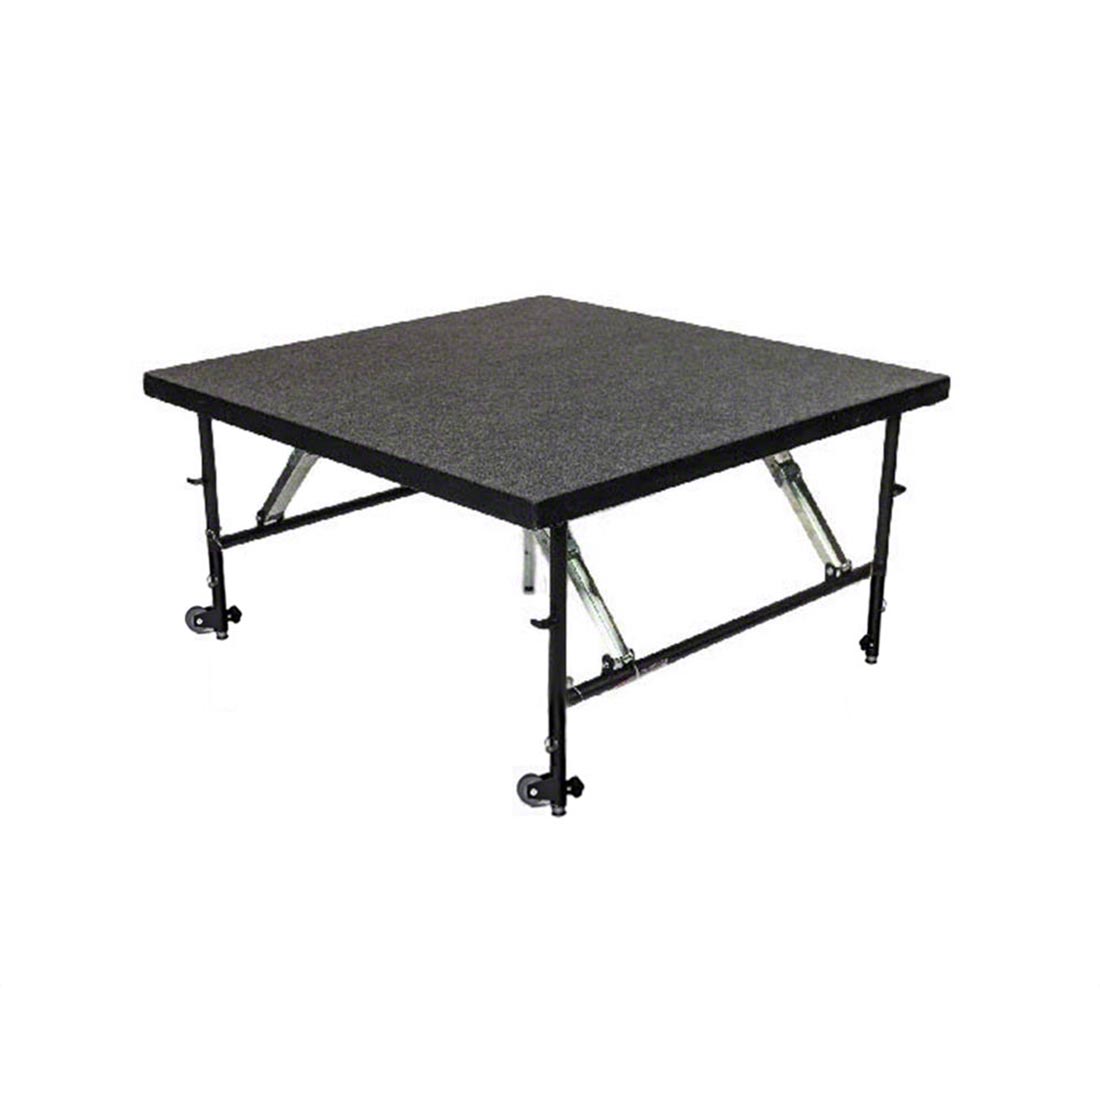 Staging 101 4'x4' Stage Panel with Wheels, 24